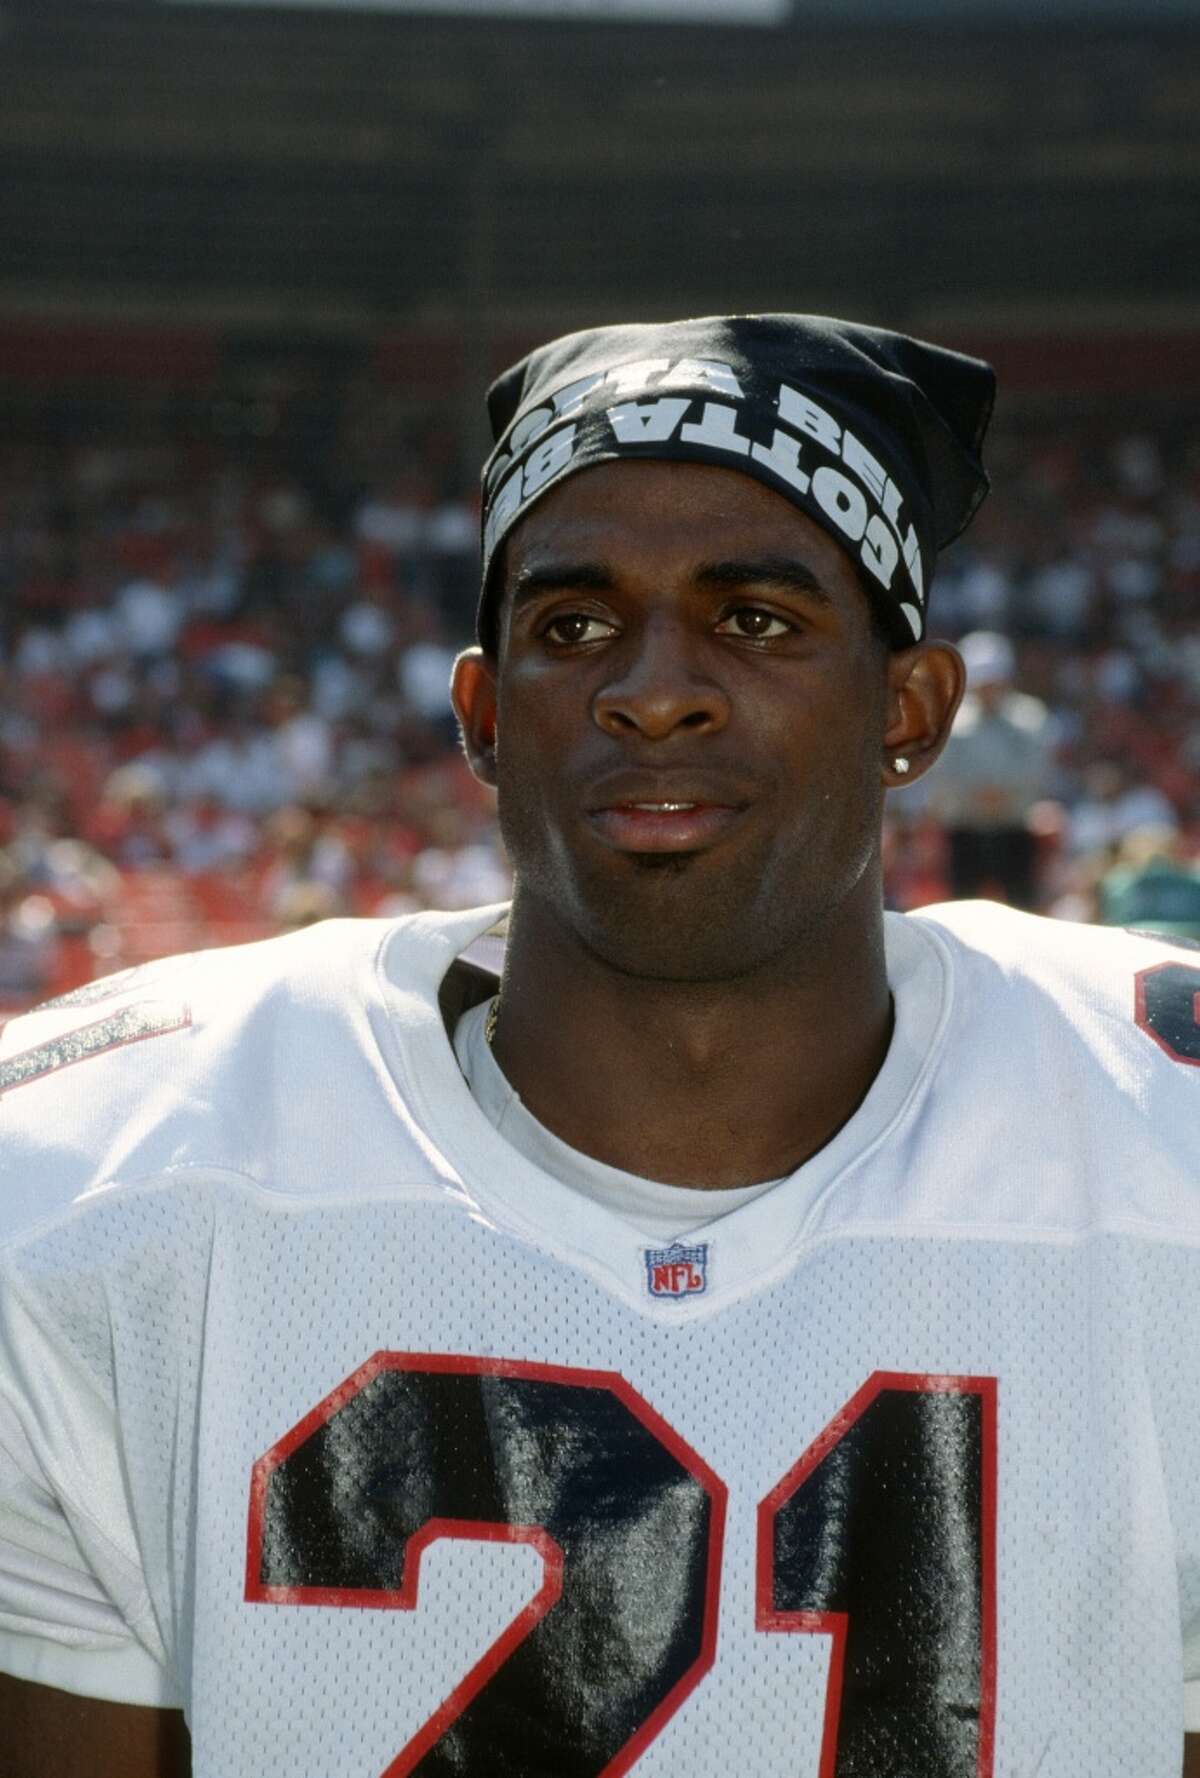 Atlanta: Deion Sanders, CB | 1989 first round (fifth overall) Part of a top-heavy first round that saw four of the first five picks make the Hall of Fame, Atlanta got a great return with Sanders. The man known as "Prime Time" is one of the most colorful players in NFL history while also being one of the finest corners in league annals. His ability to shut down half the field caused many an opponent to rethink their game plans.